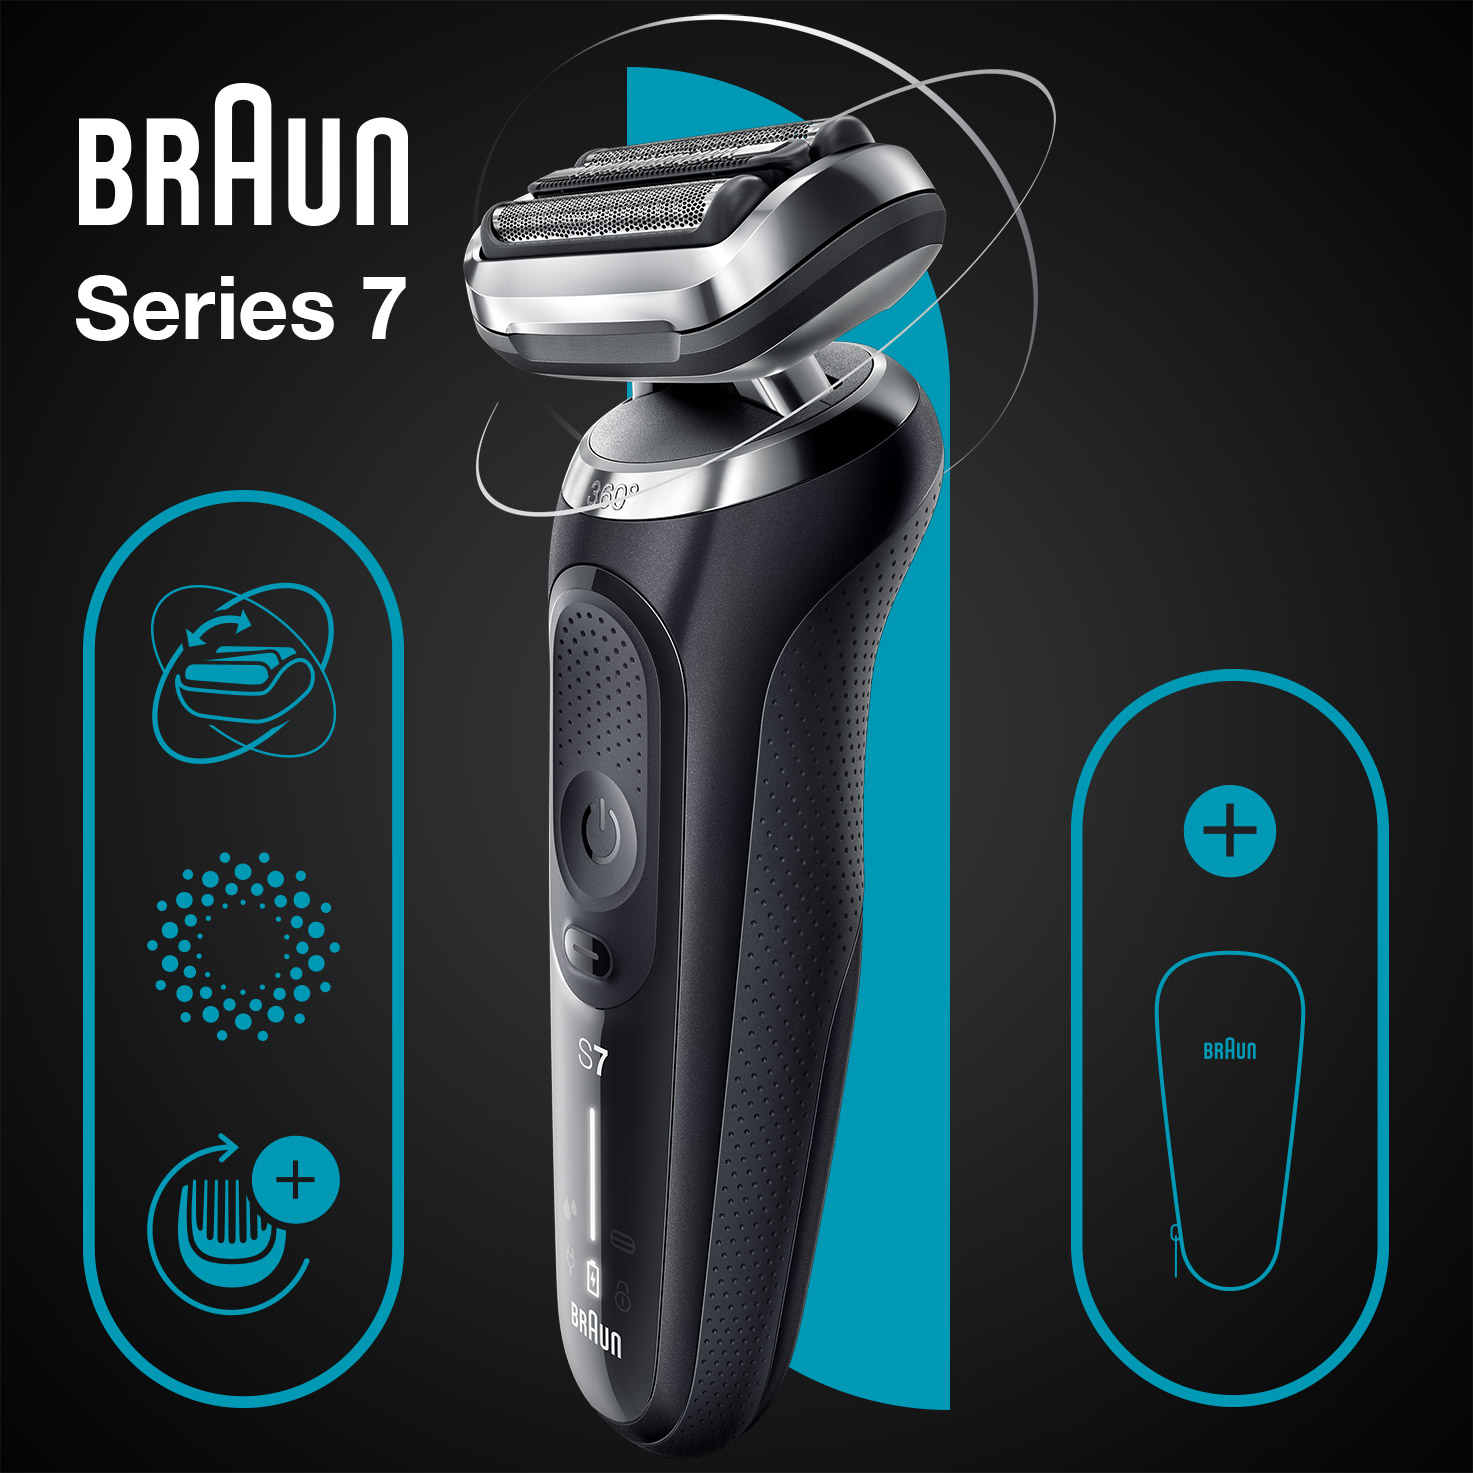 Series 7 shaver Wet Dry travel & case, 71-N1000s with